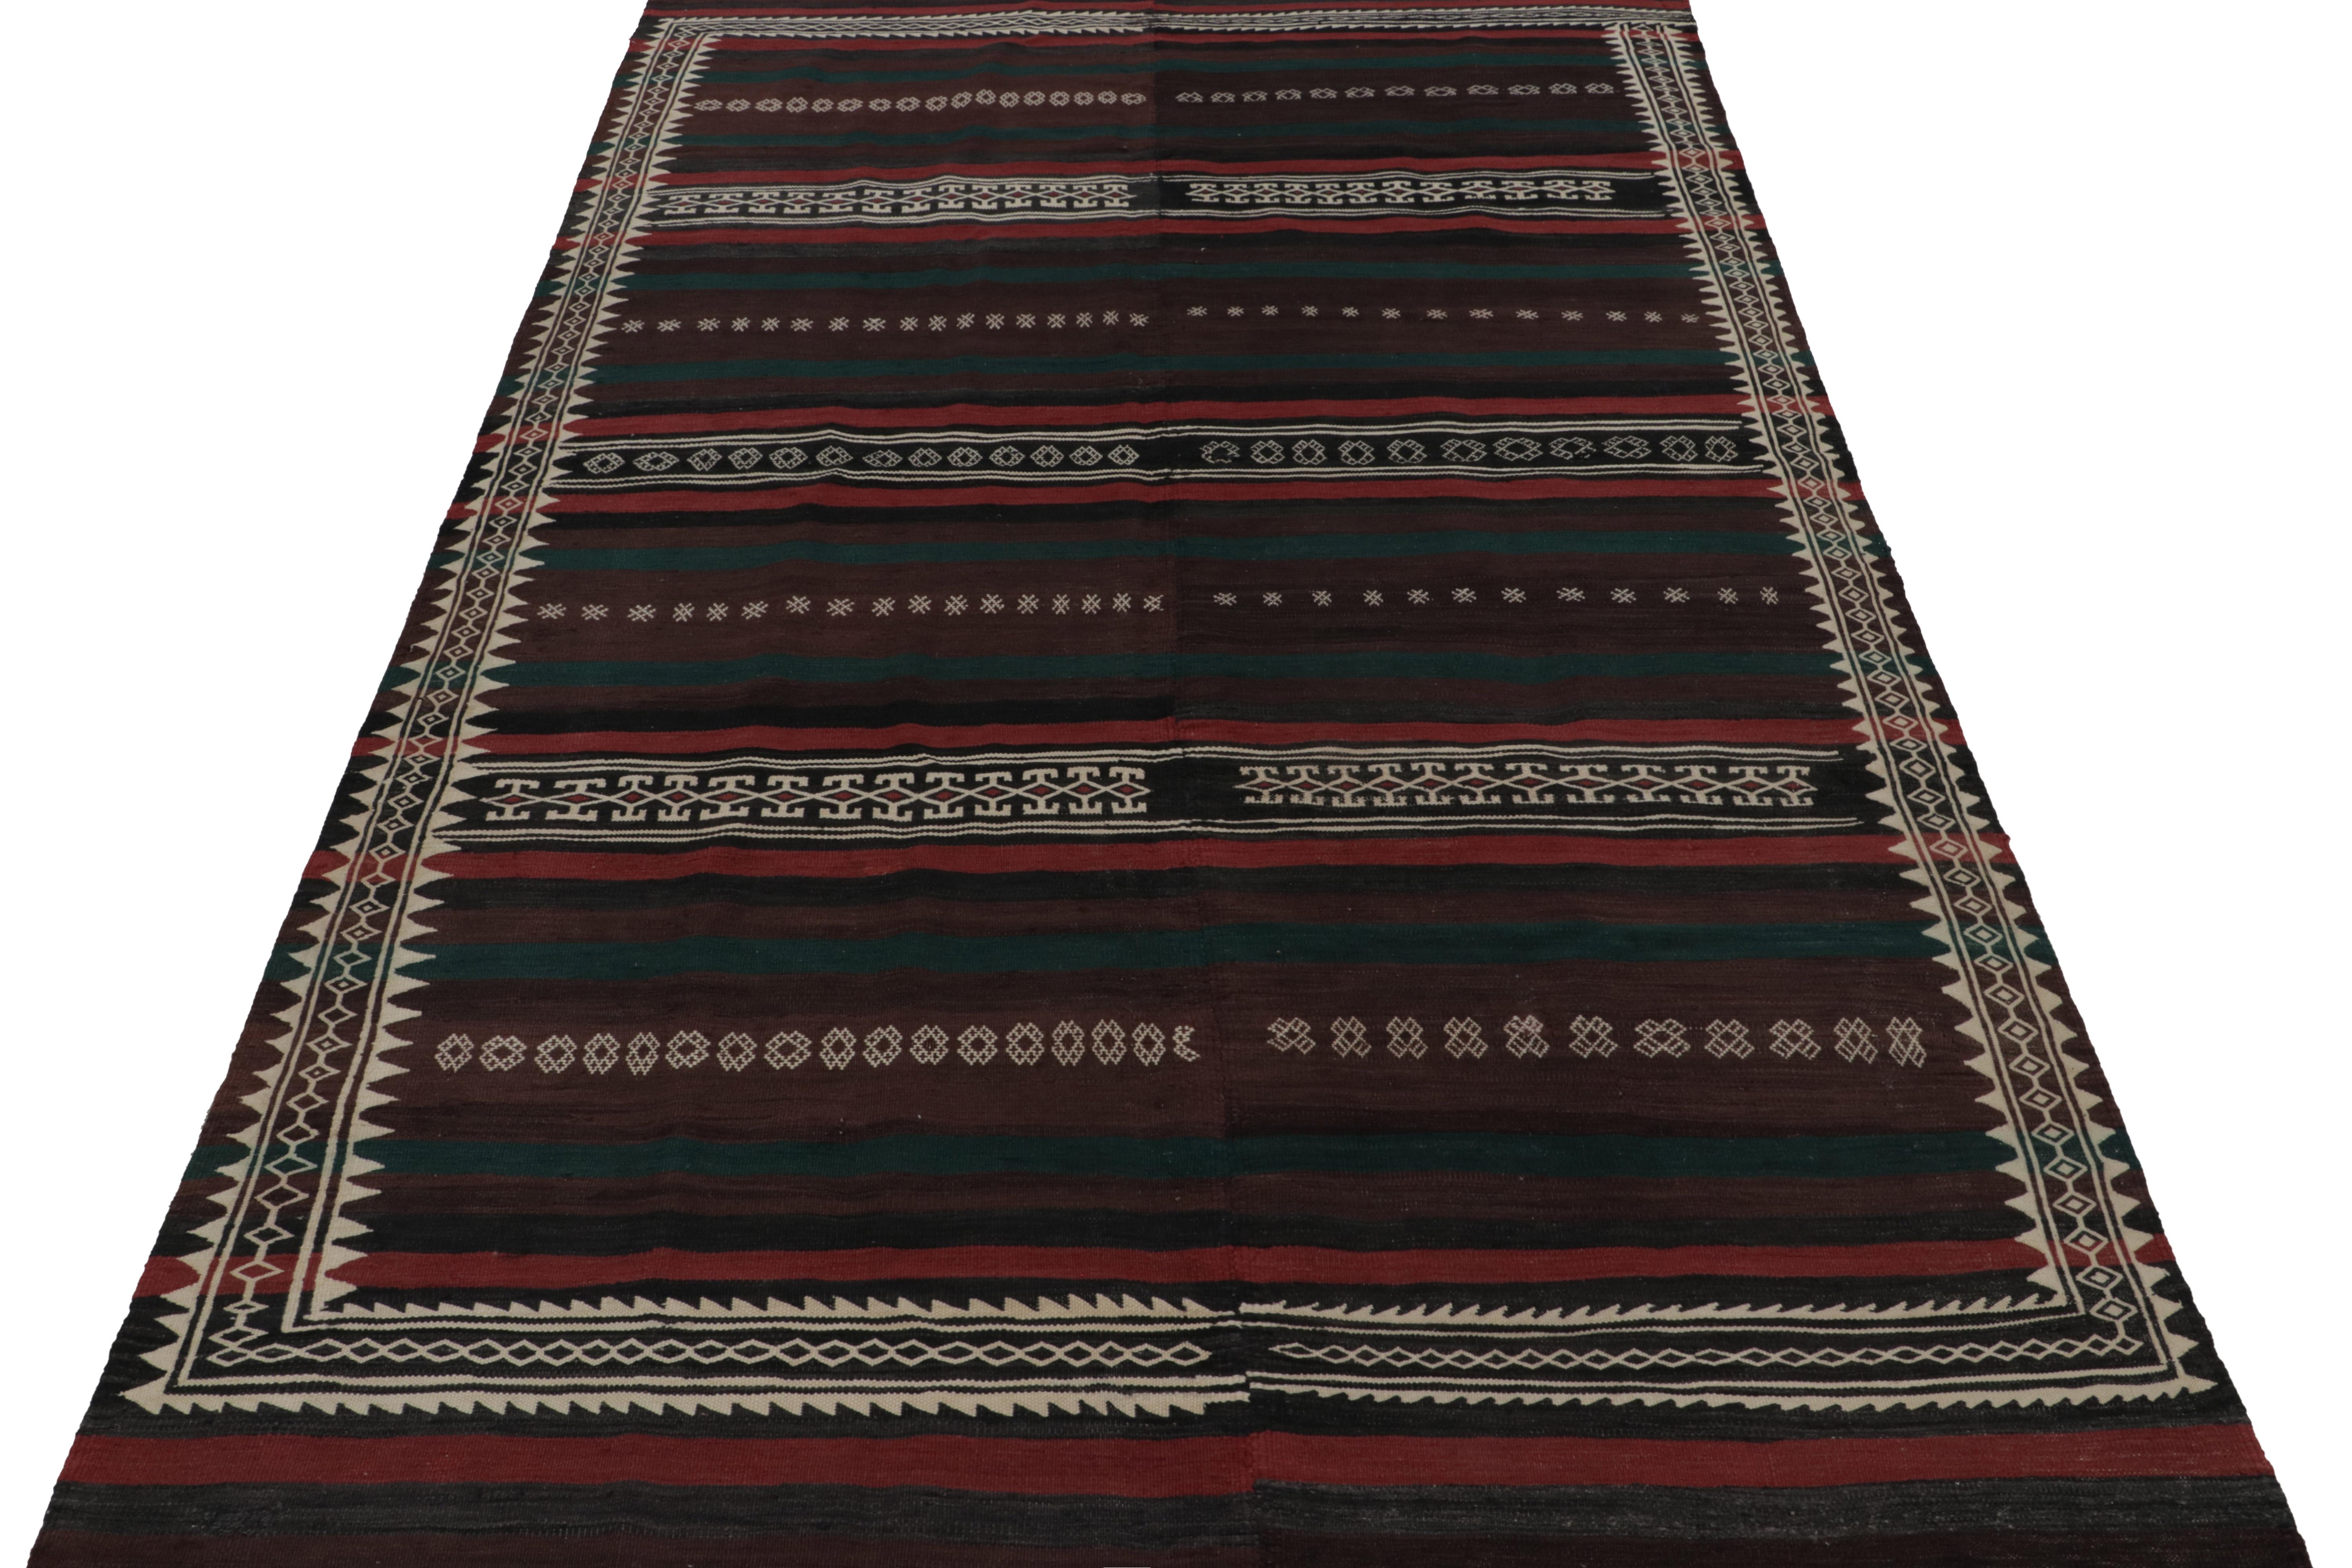 Hand-Knotted Vintage Afghan Tribal Kilim with Red-Brown Geometric Patterns, from Rug & Kilim For Sale